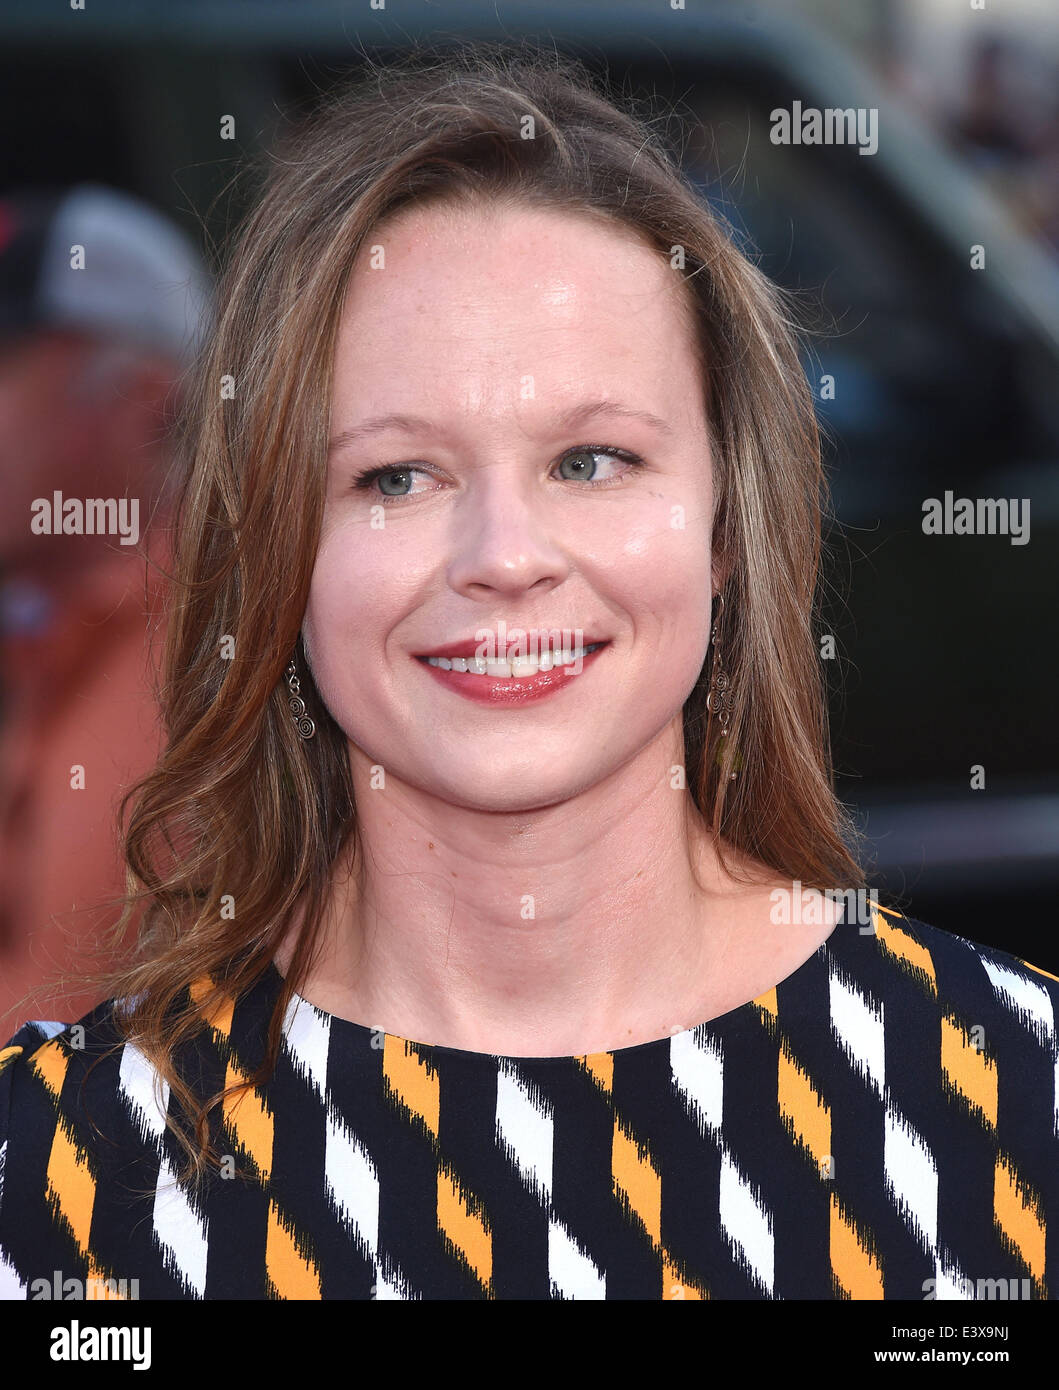 Hollywood, California, USA. 30th June, 2014. Thora Birch arrives for the premiere of the film 'Tammy' at the Chinese theater. Credit:  Lisa O'Connor/ZUMAPRESS.com/Alamy Live News Stock Photo